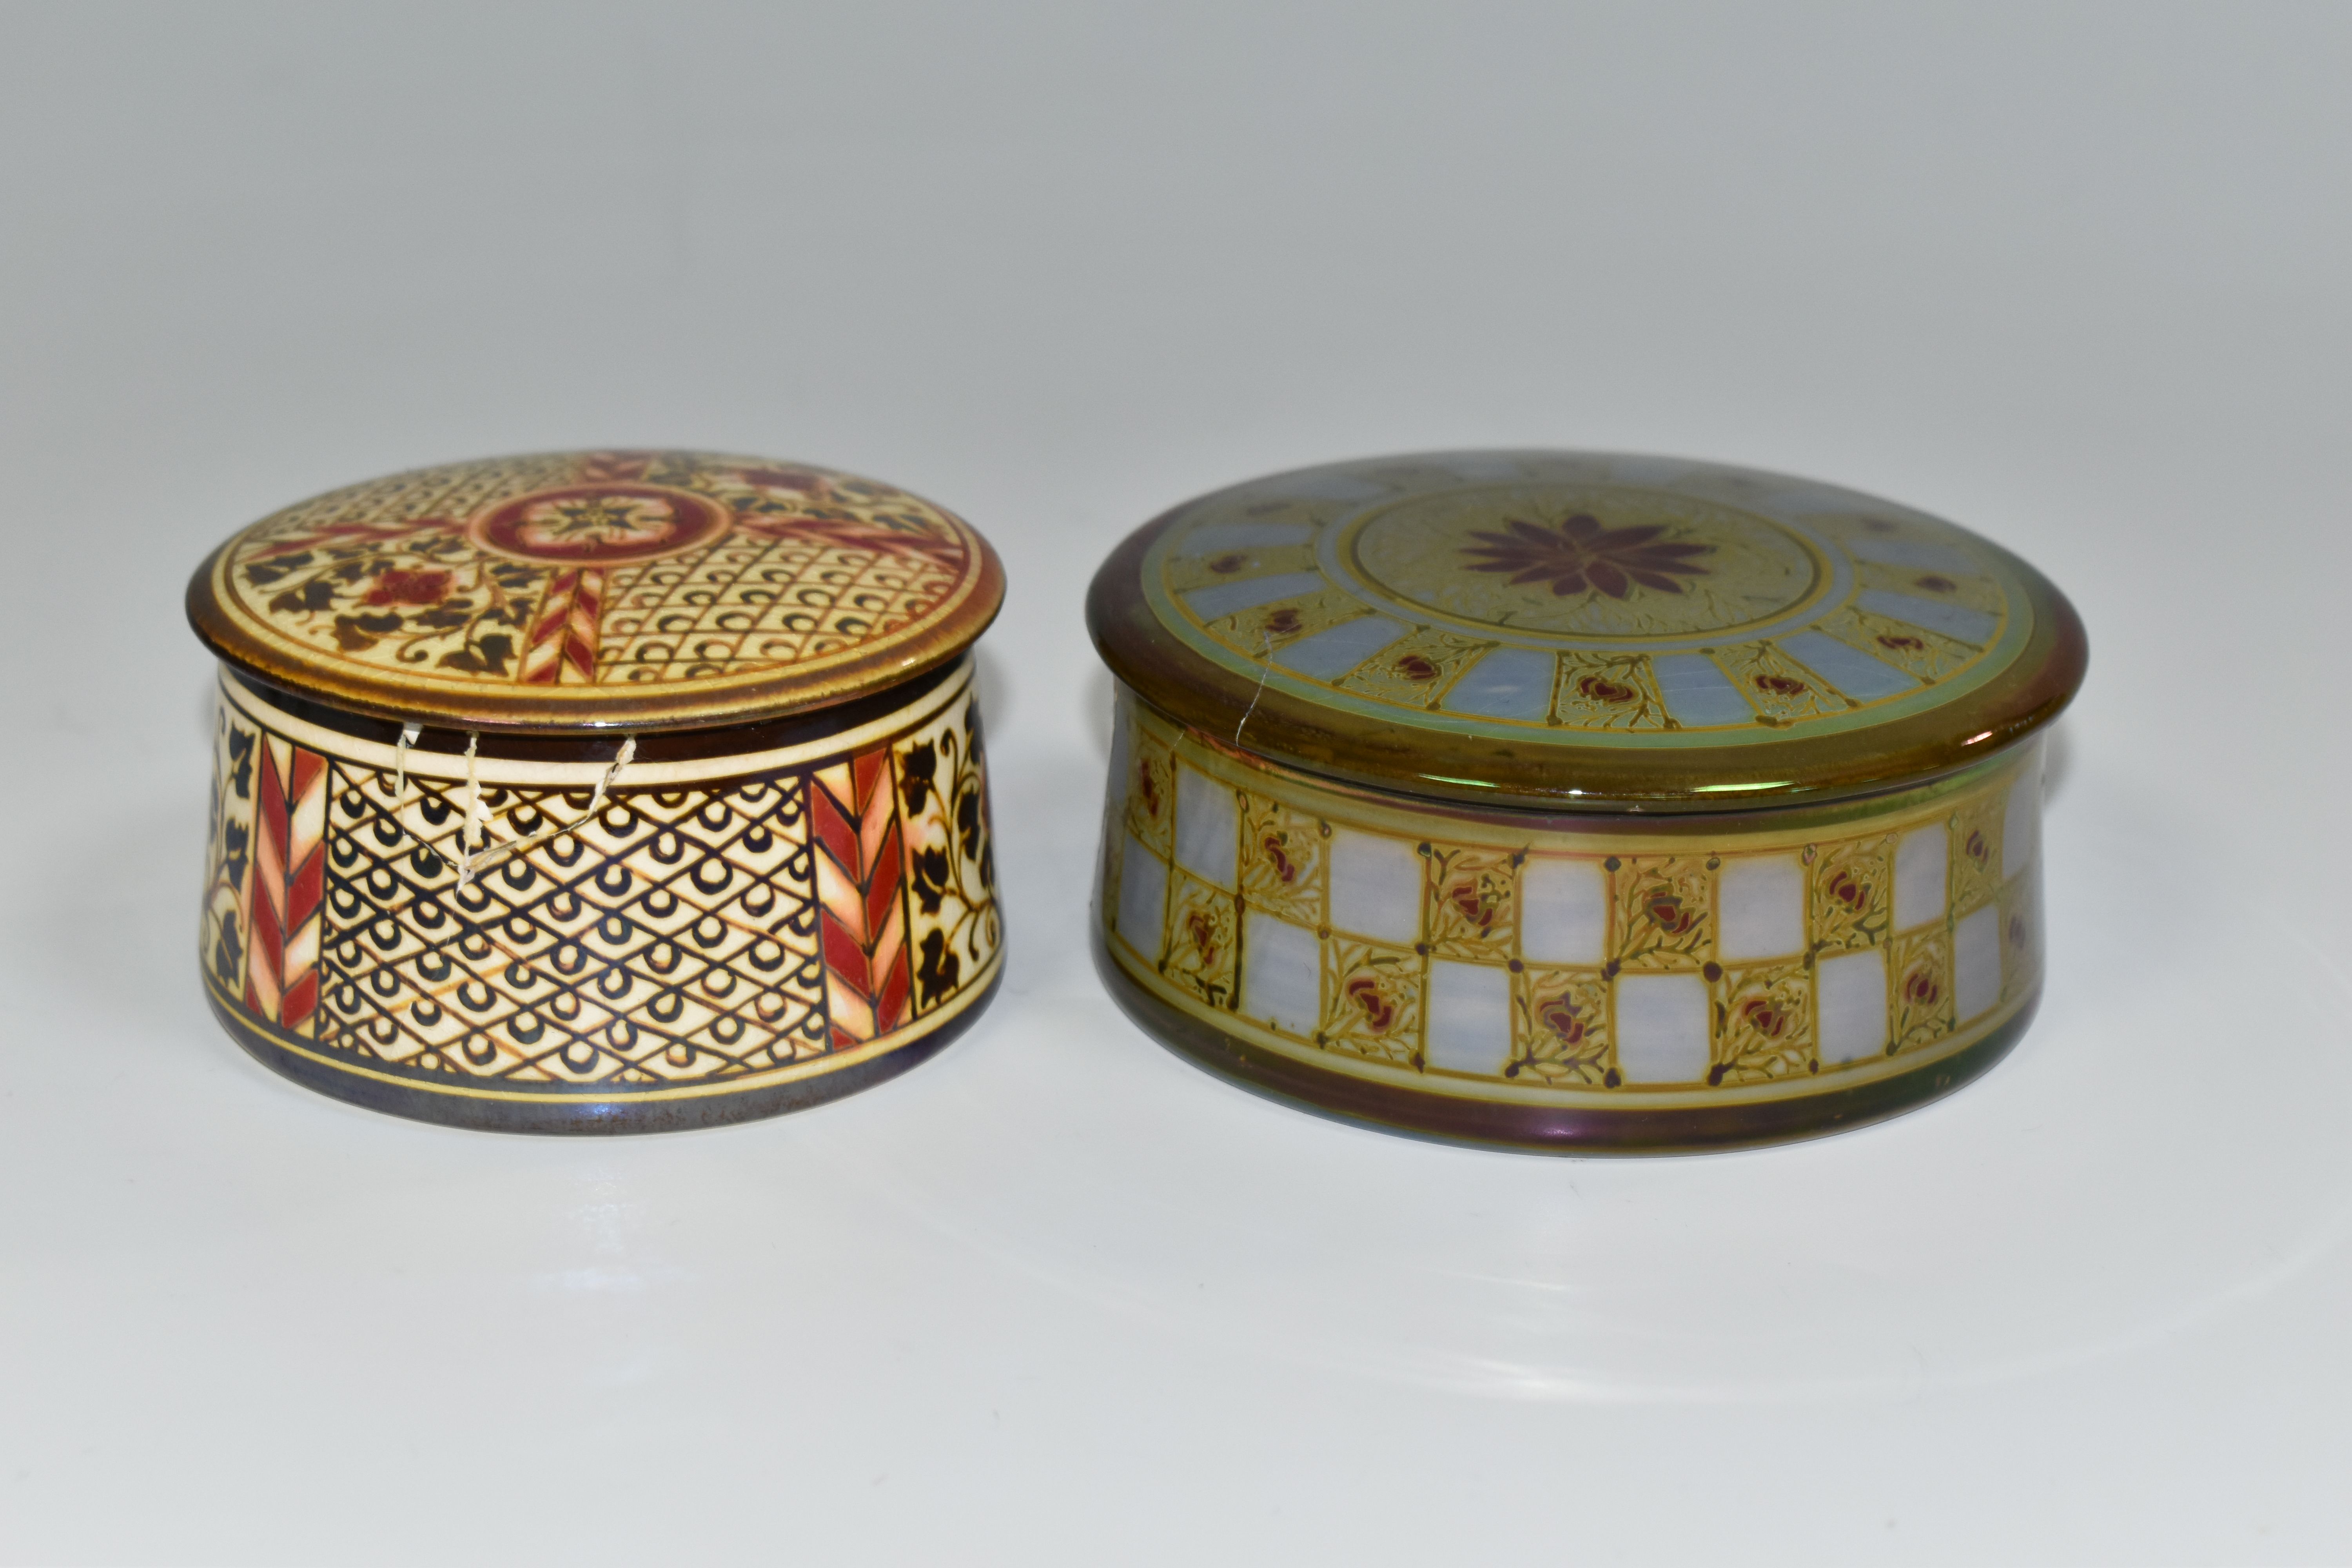 TWO PILKINGTON'S TRINKET BOXES, early twentieth century circular boxes with floral and foliate - Image 2 of 6